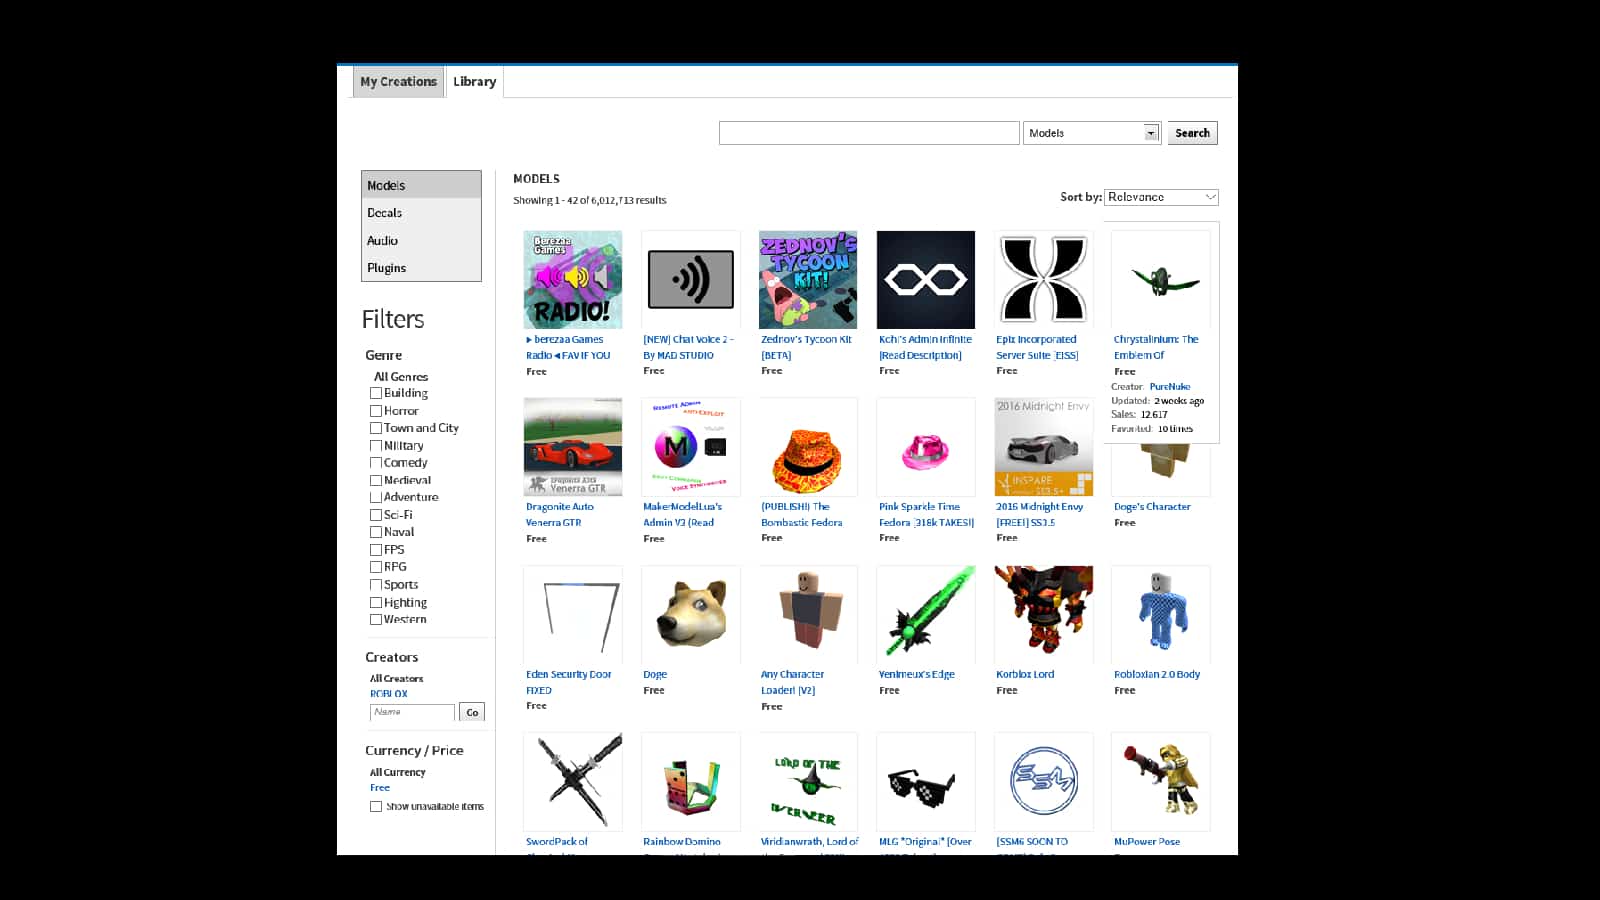 Stickers pack of all characters of Roblox doors game | Sticker